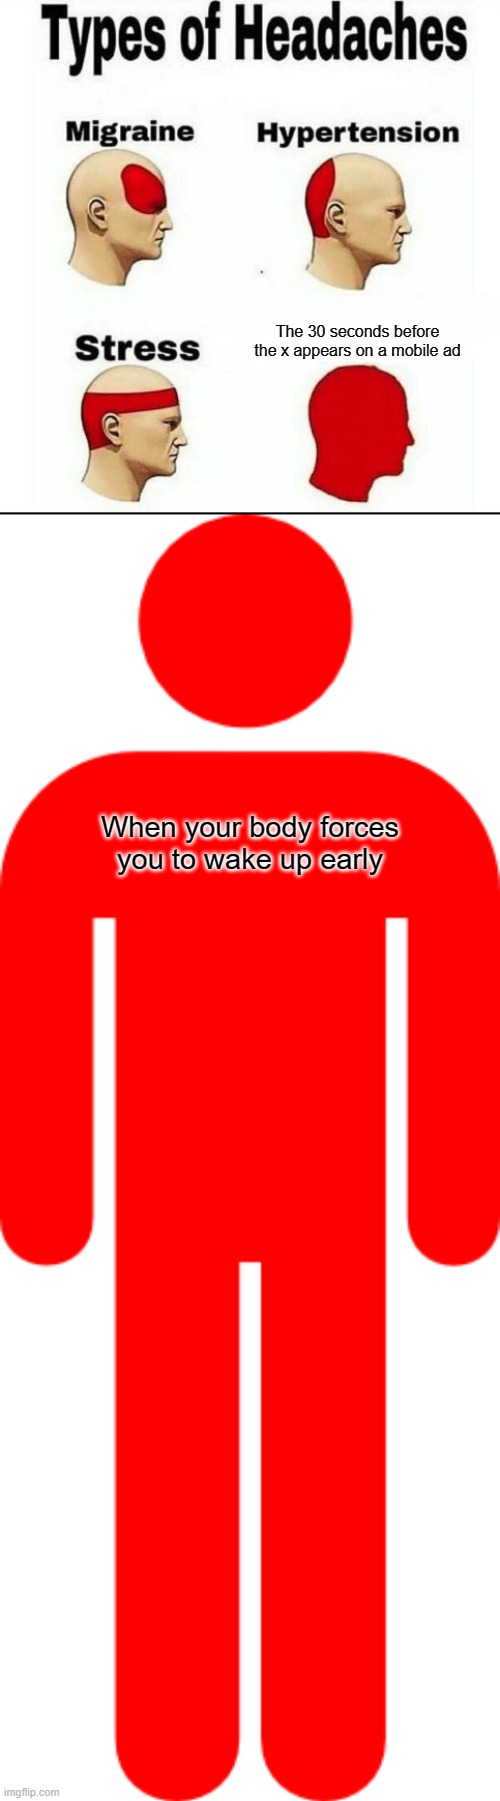 The thing that makes my entire body ache | The 30 seconds before the x appears on a mobile ad; When your body forces you to wake up early | image tagged in types of headaches meme | made w/ Imgflip meme maker